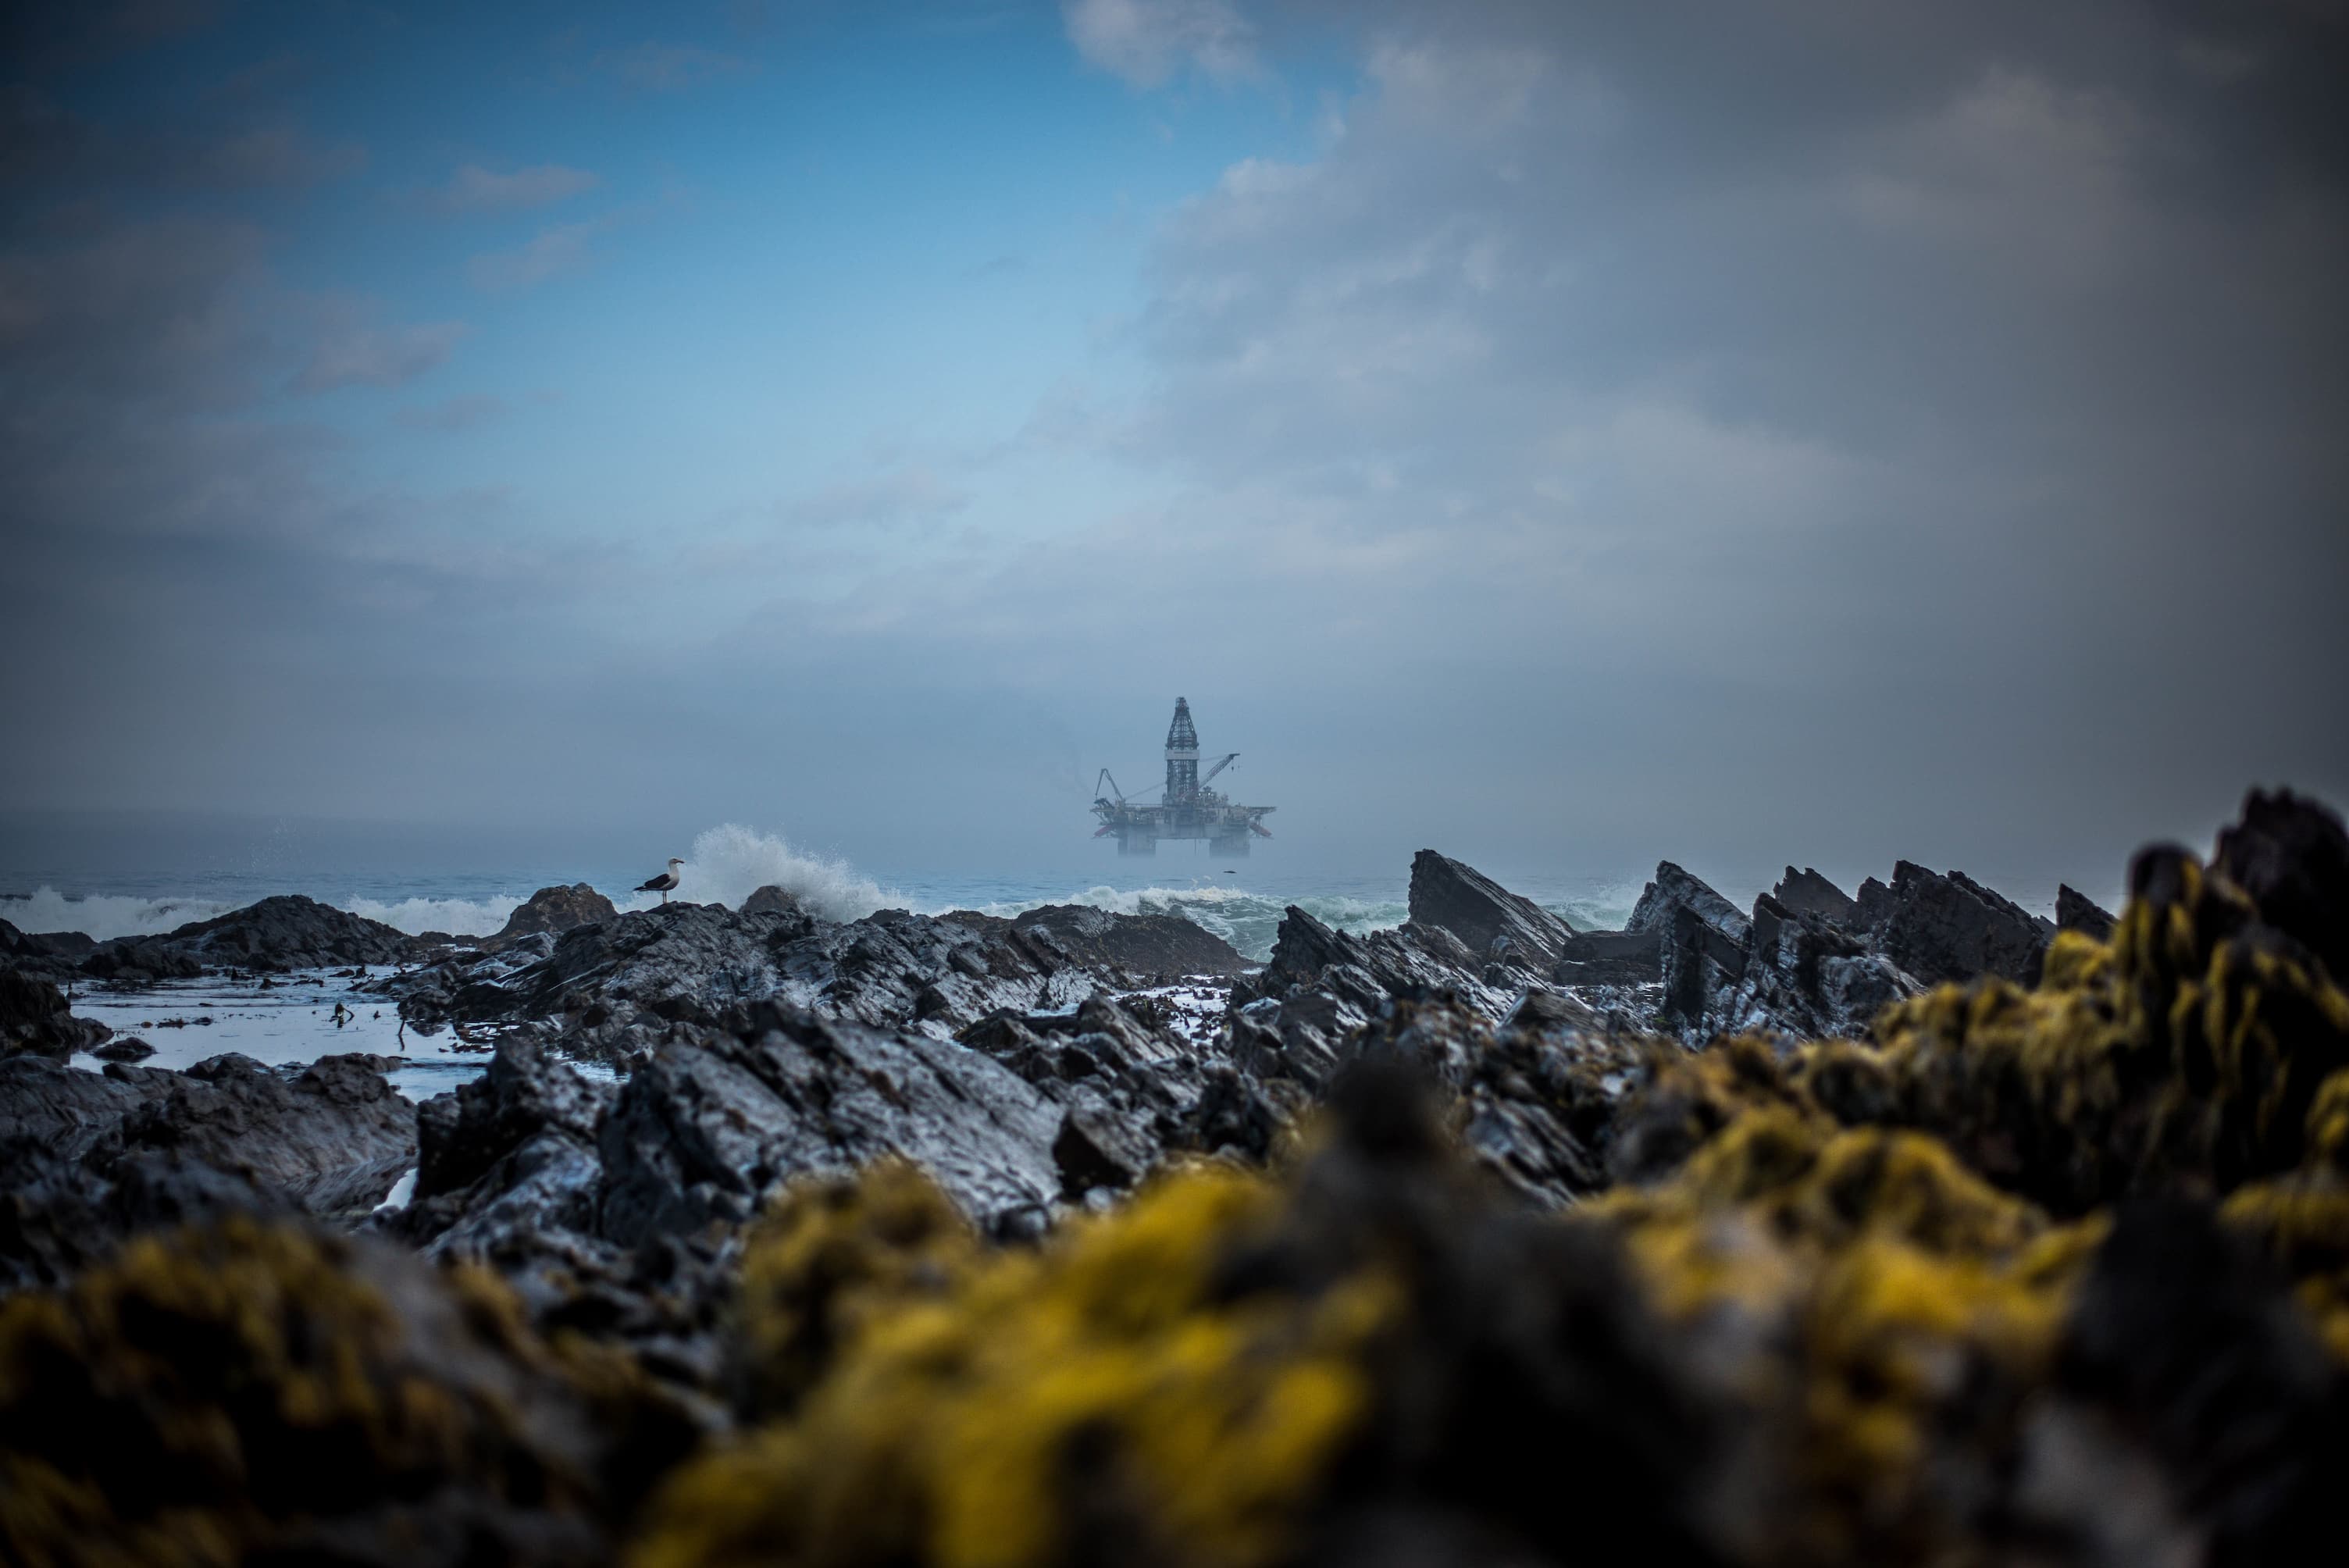 Oil rig in distance out to sea, crashing waves against rocks in foreground